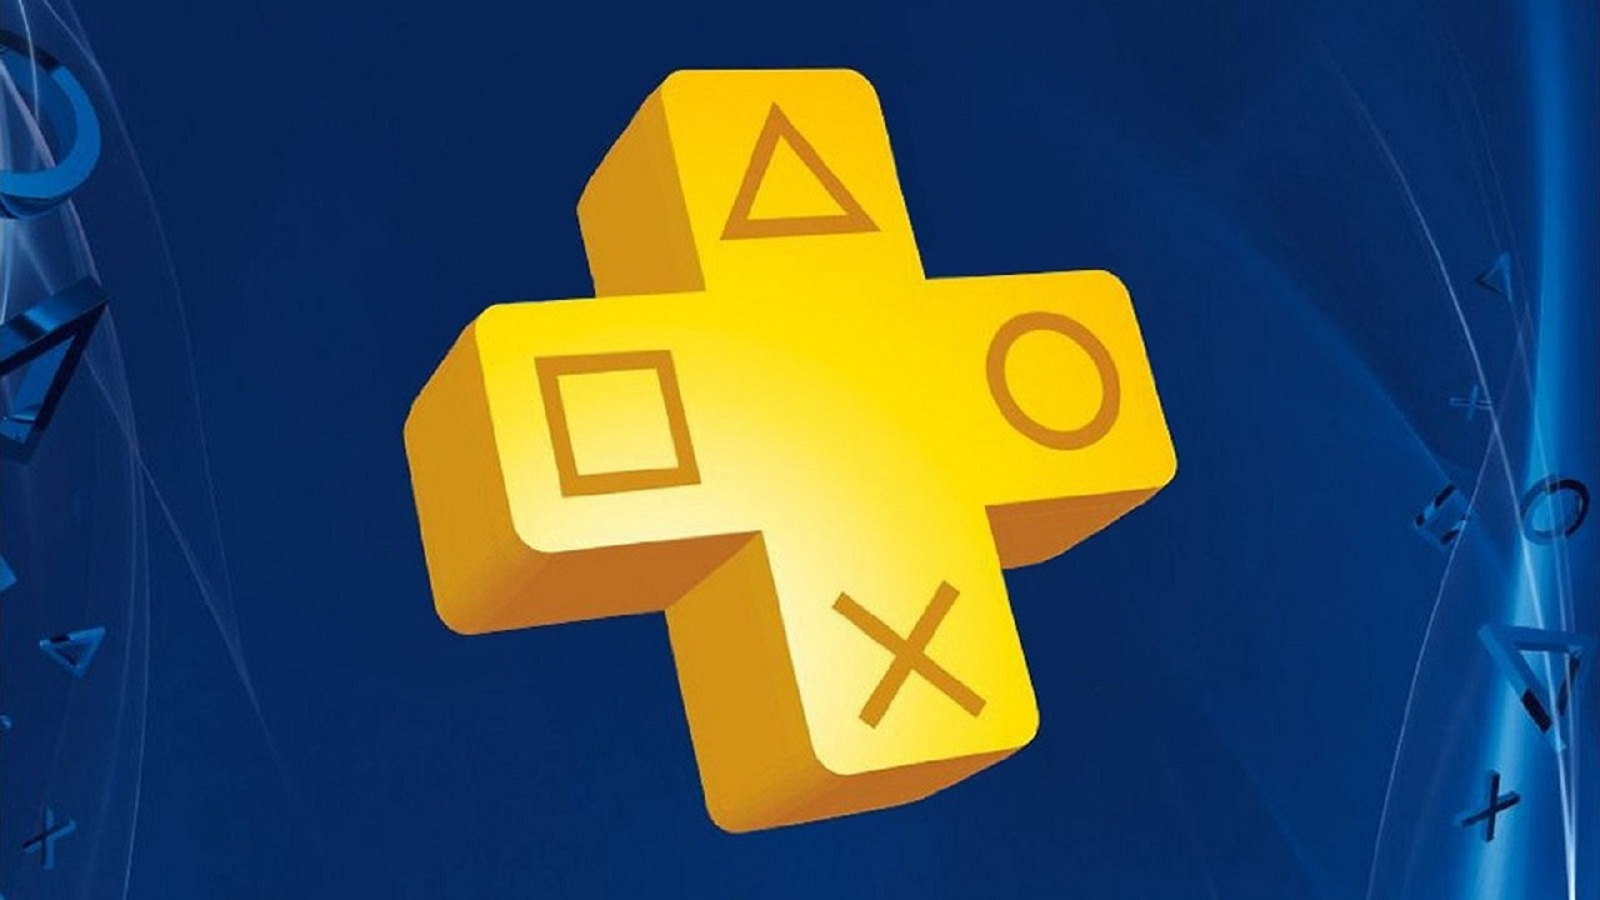 These 3 things can make Playstation Plus worth the price